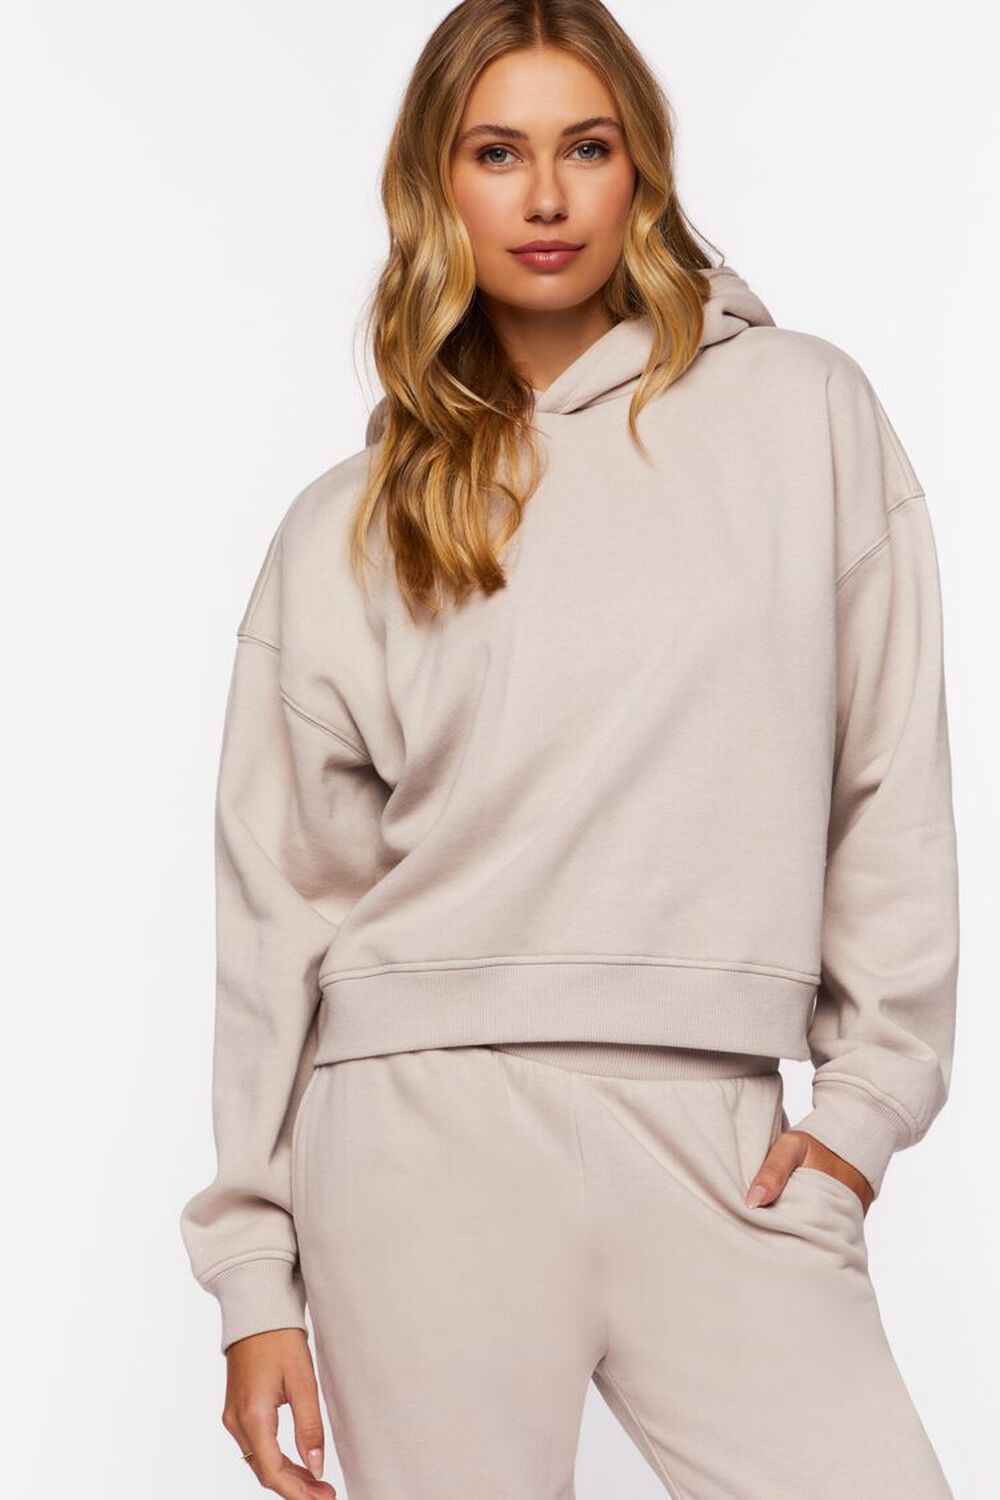 OYSTER GREY Organically Grown Cotton Hoodie, image 1